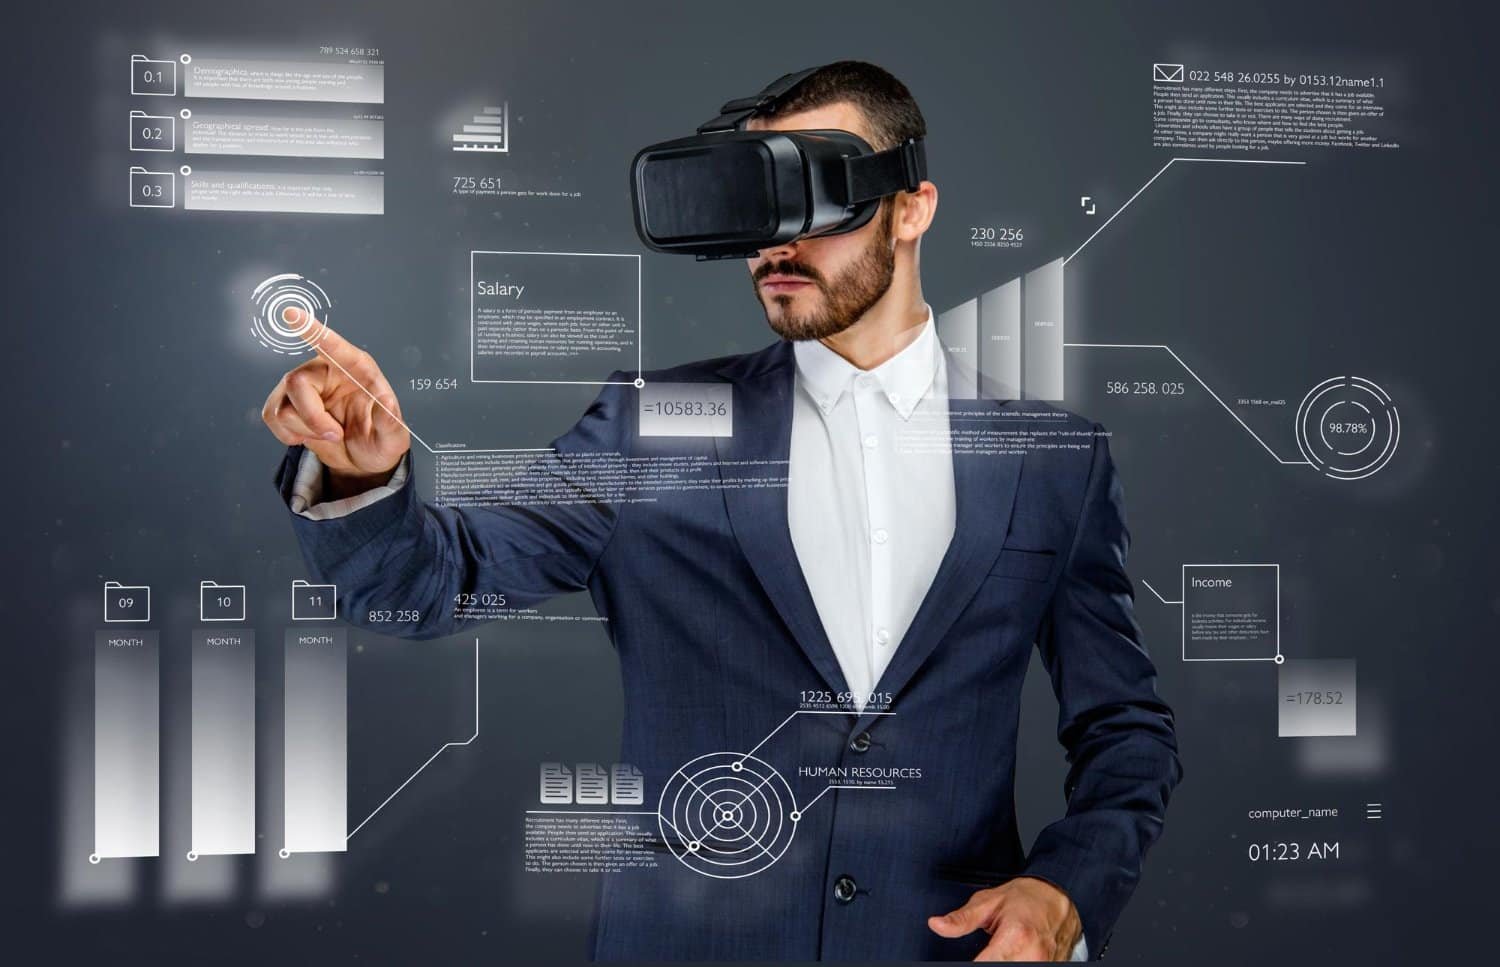 The Role of Augmented Reality in Marketing